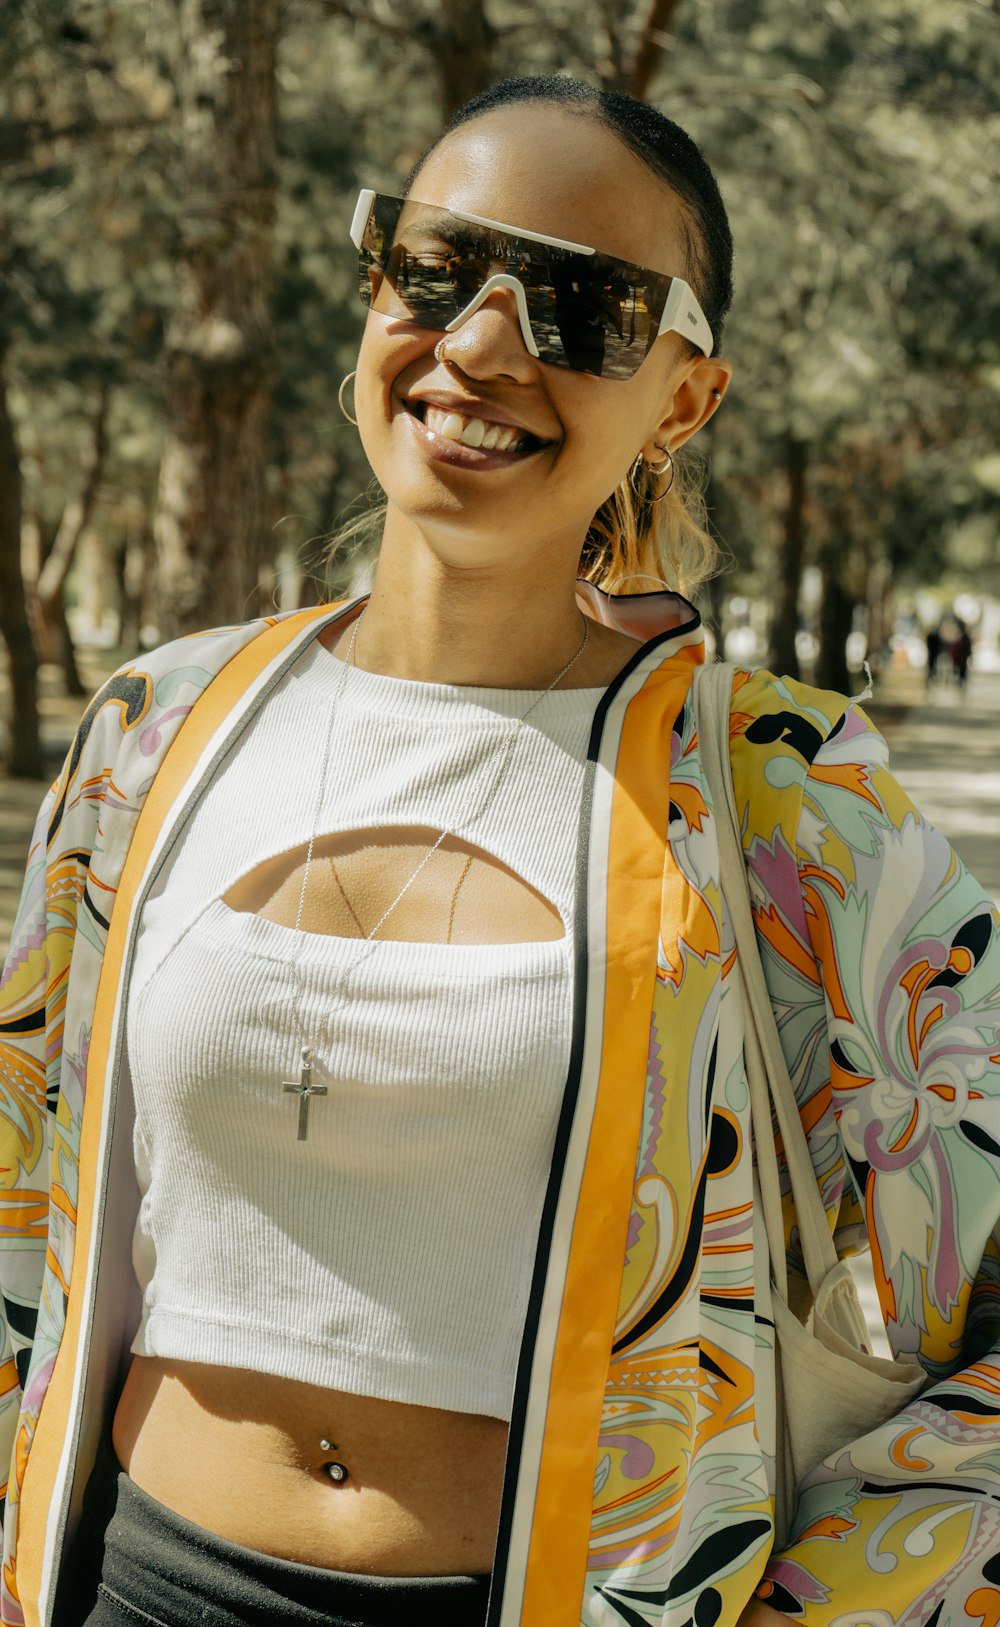 a woman wearing sunglasses and a colorful jacket